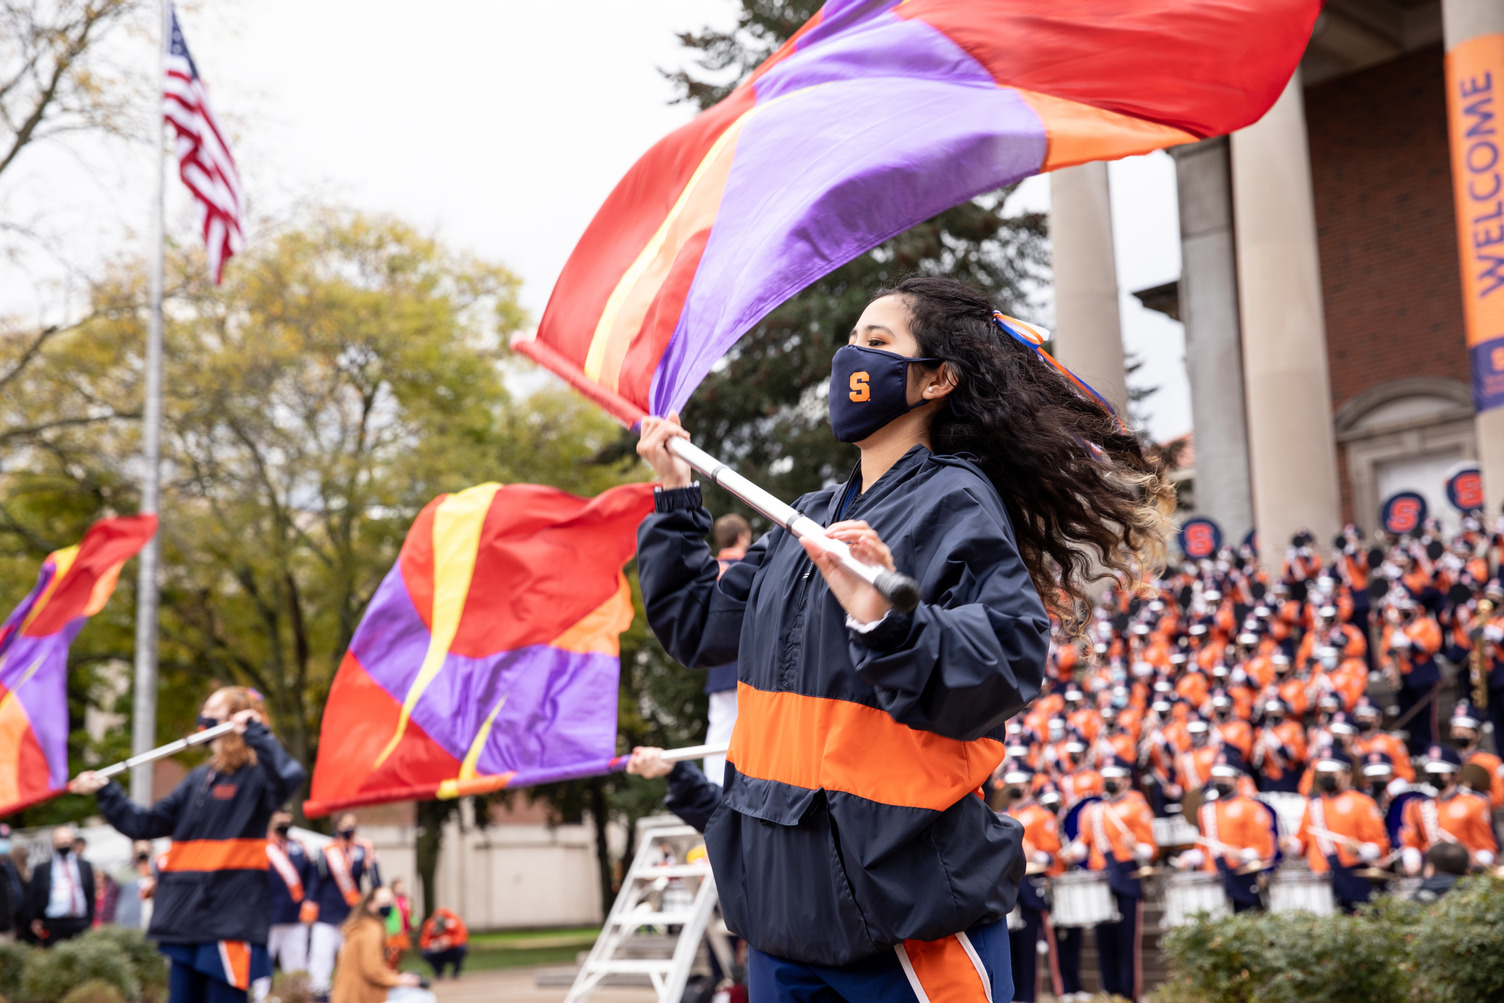 member of the flag corps waves a colorful flag during a marching band performance